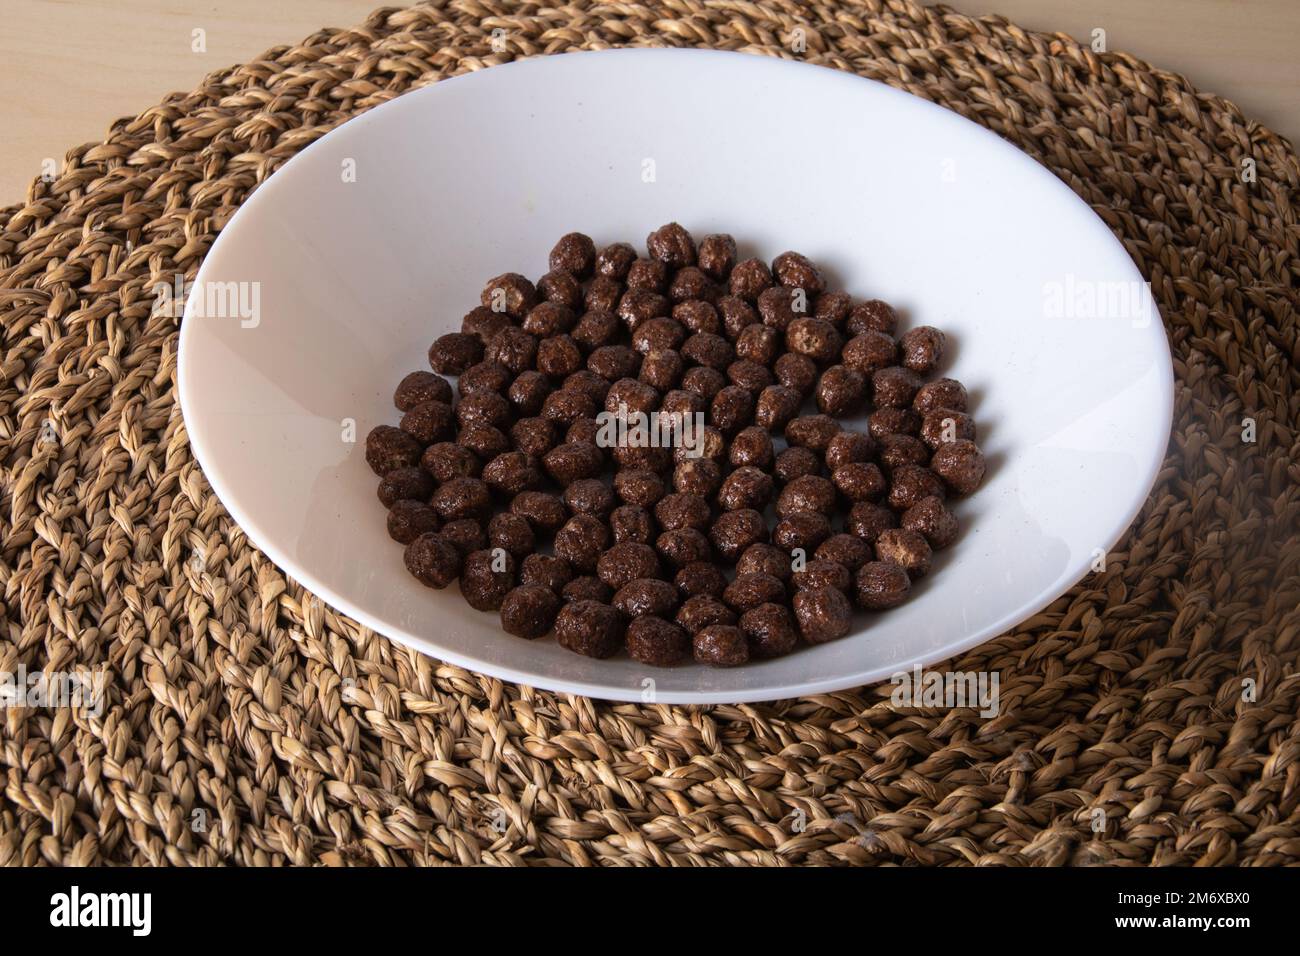 photo of edible sweet cereal balls Stock Photo